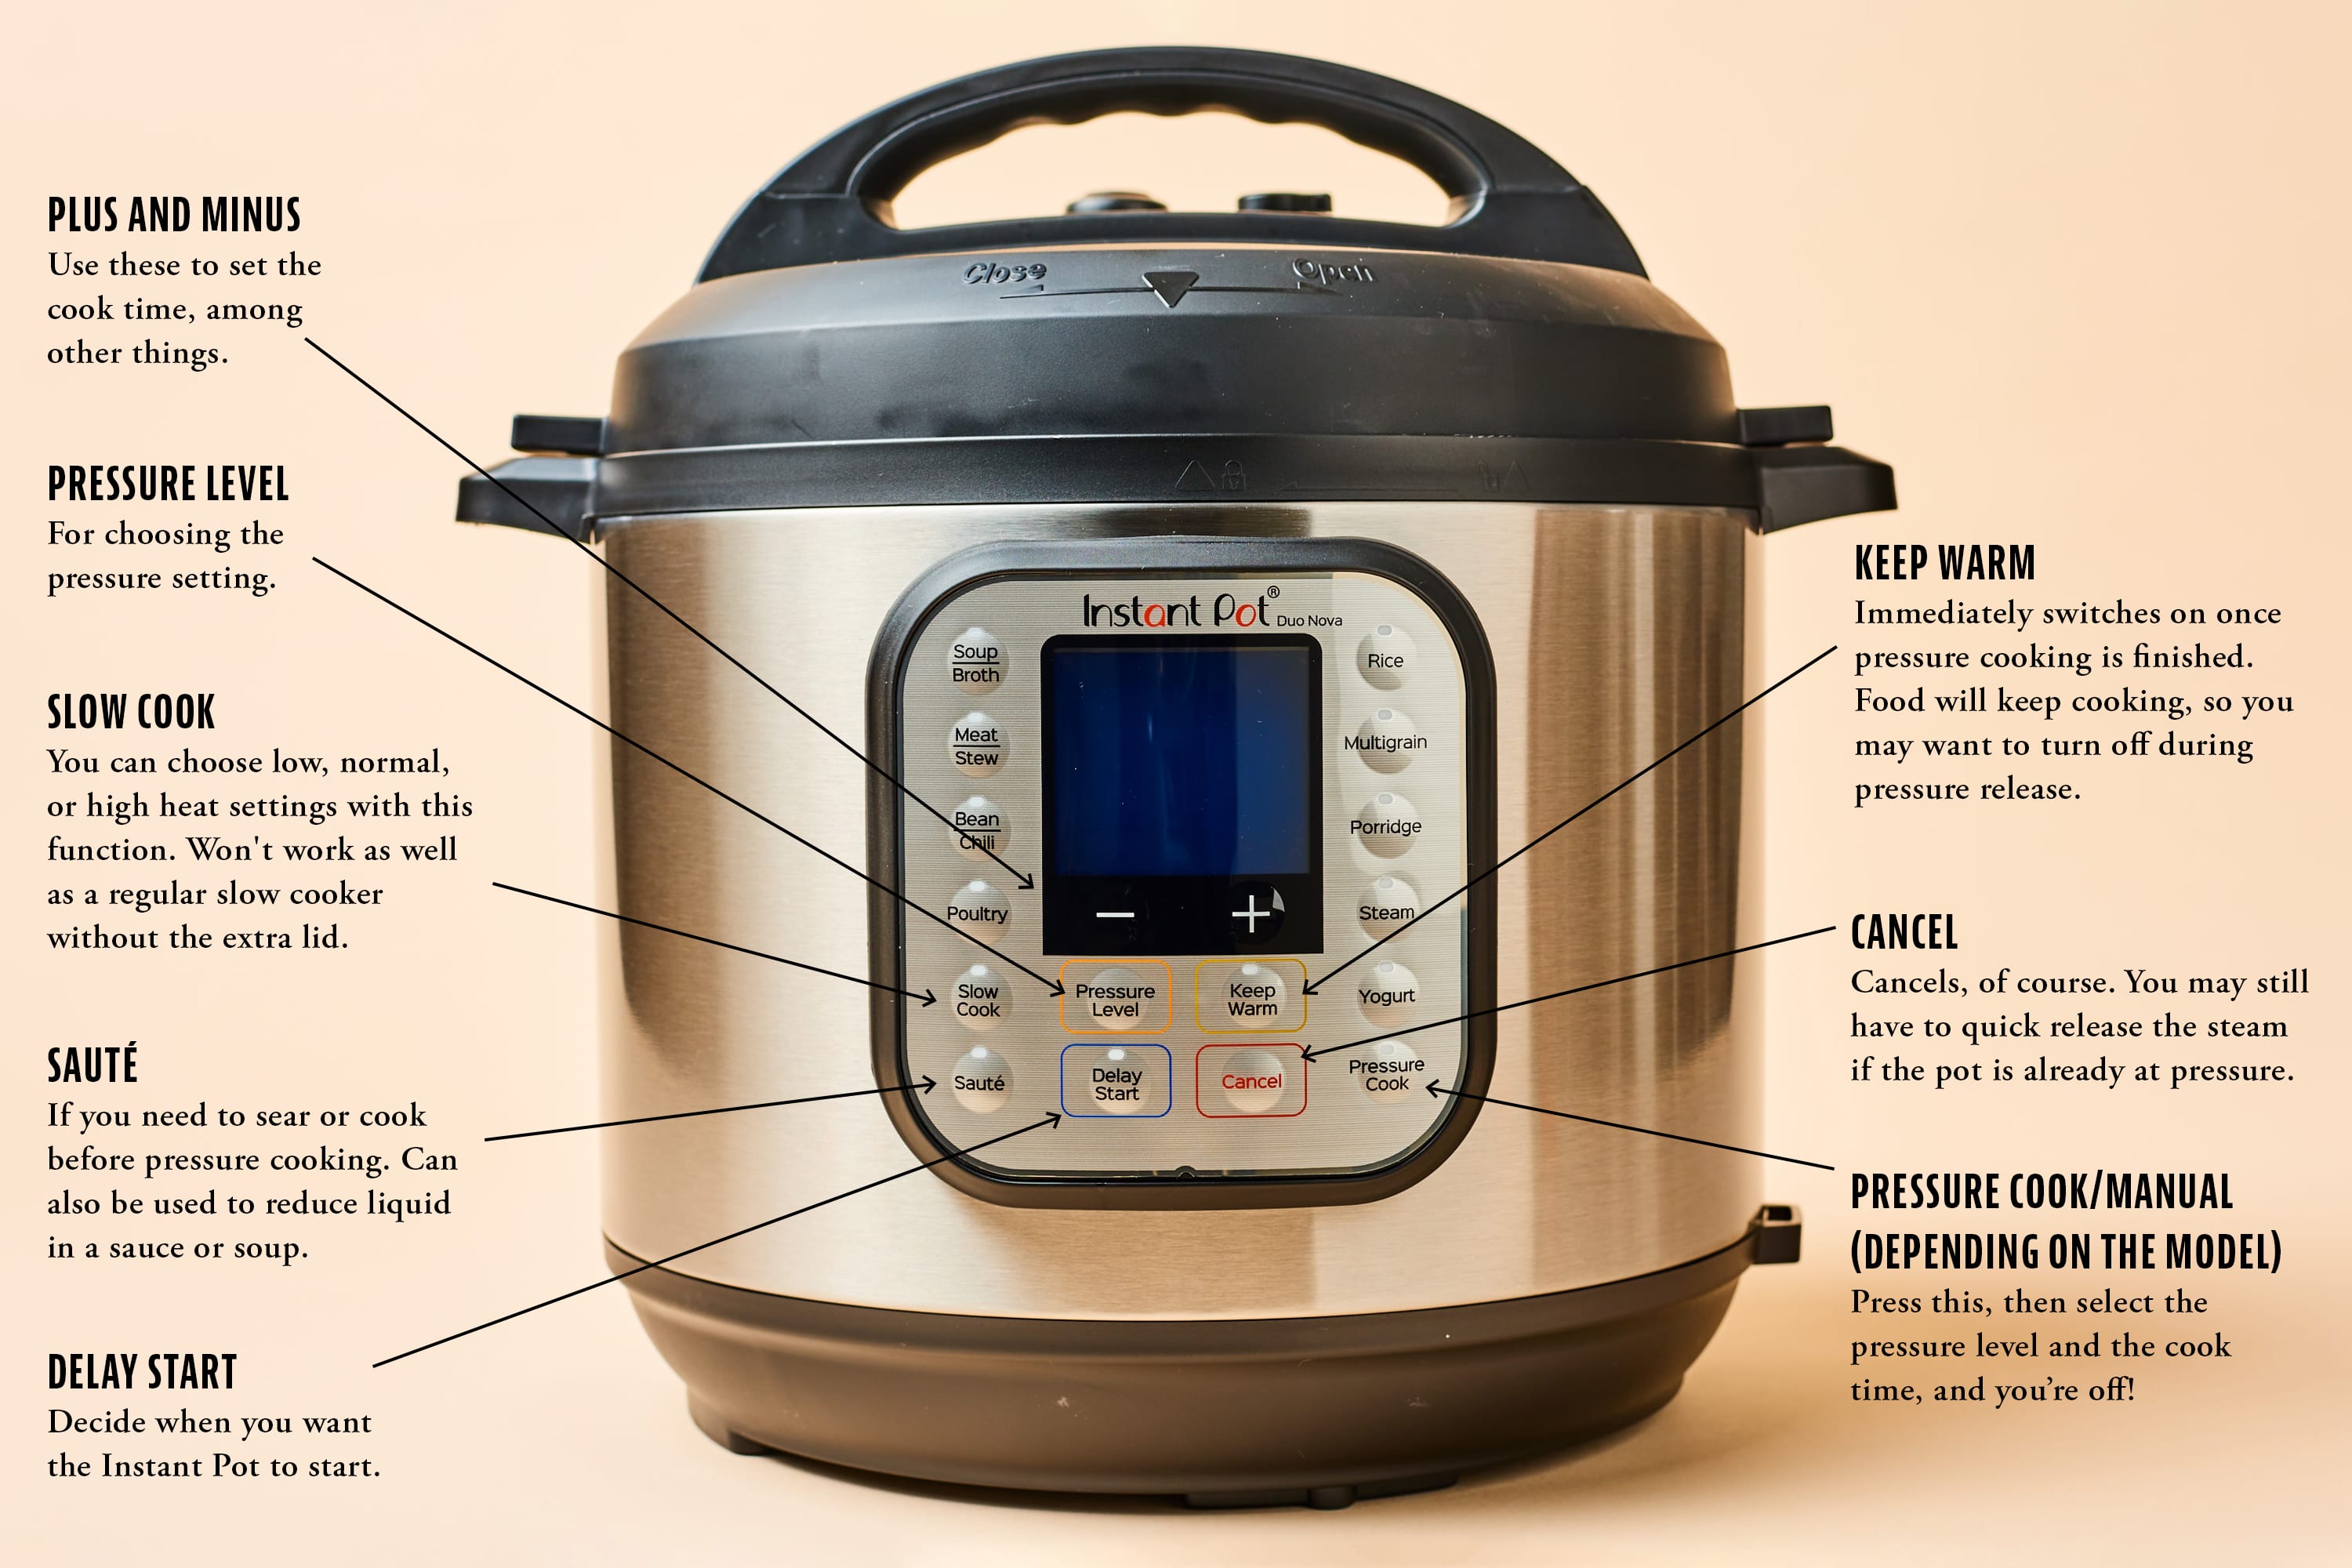 What is an Instant Pot? Here's everything you need to know